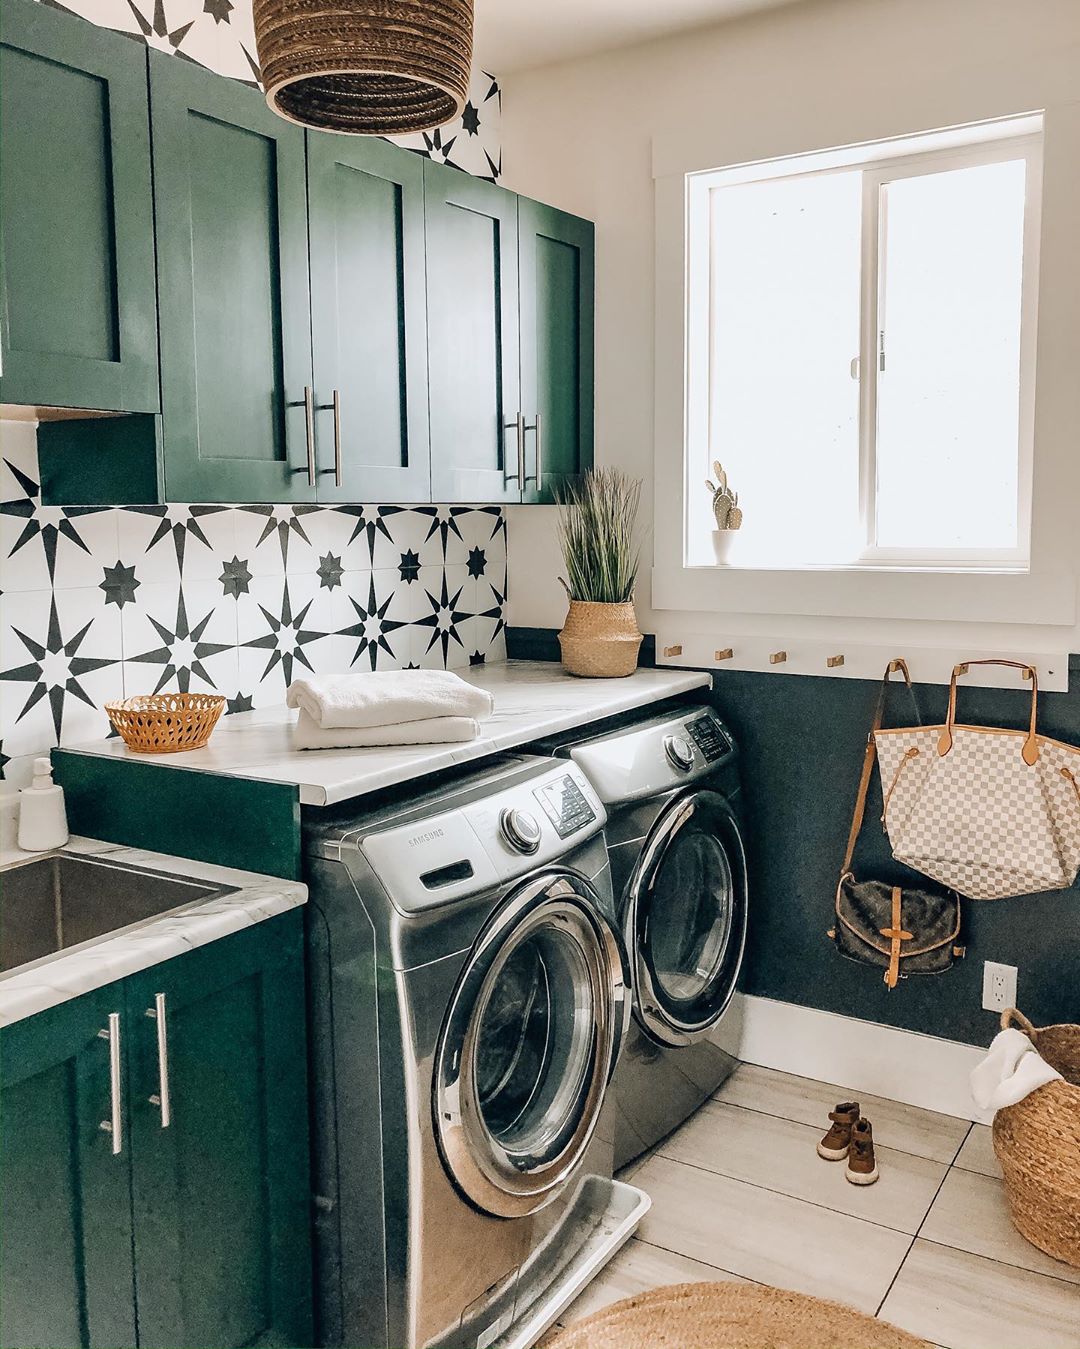 laundry room space redone to make more storage space photo by Instagram user @smalltownstyleme